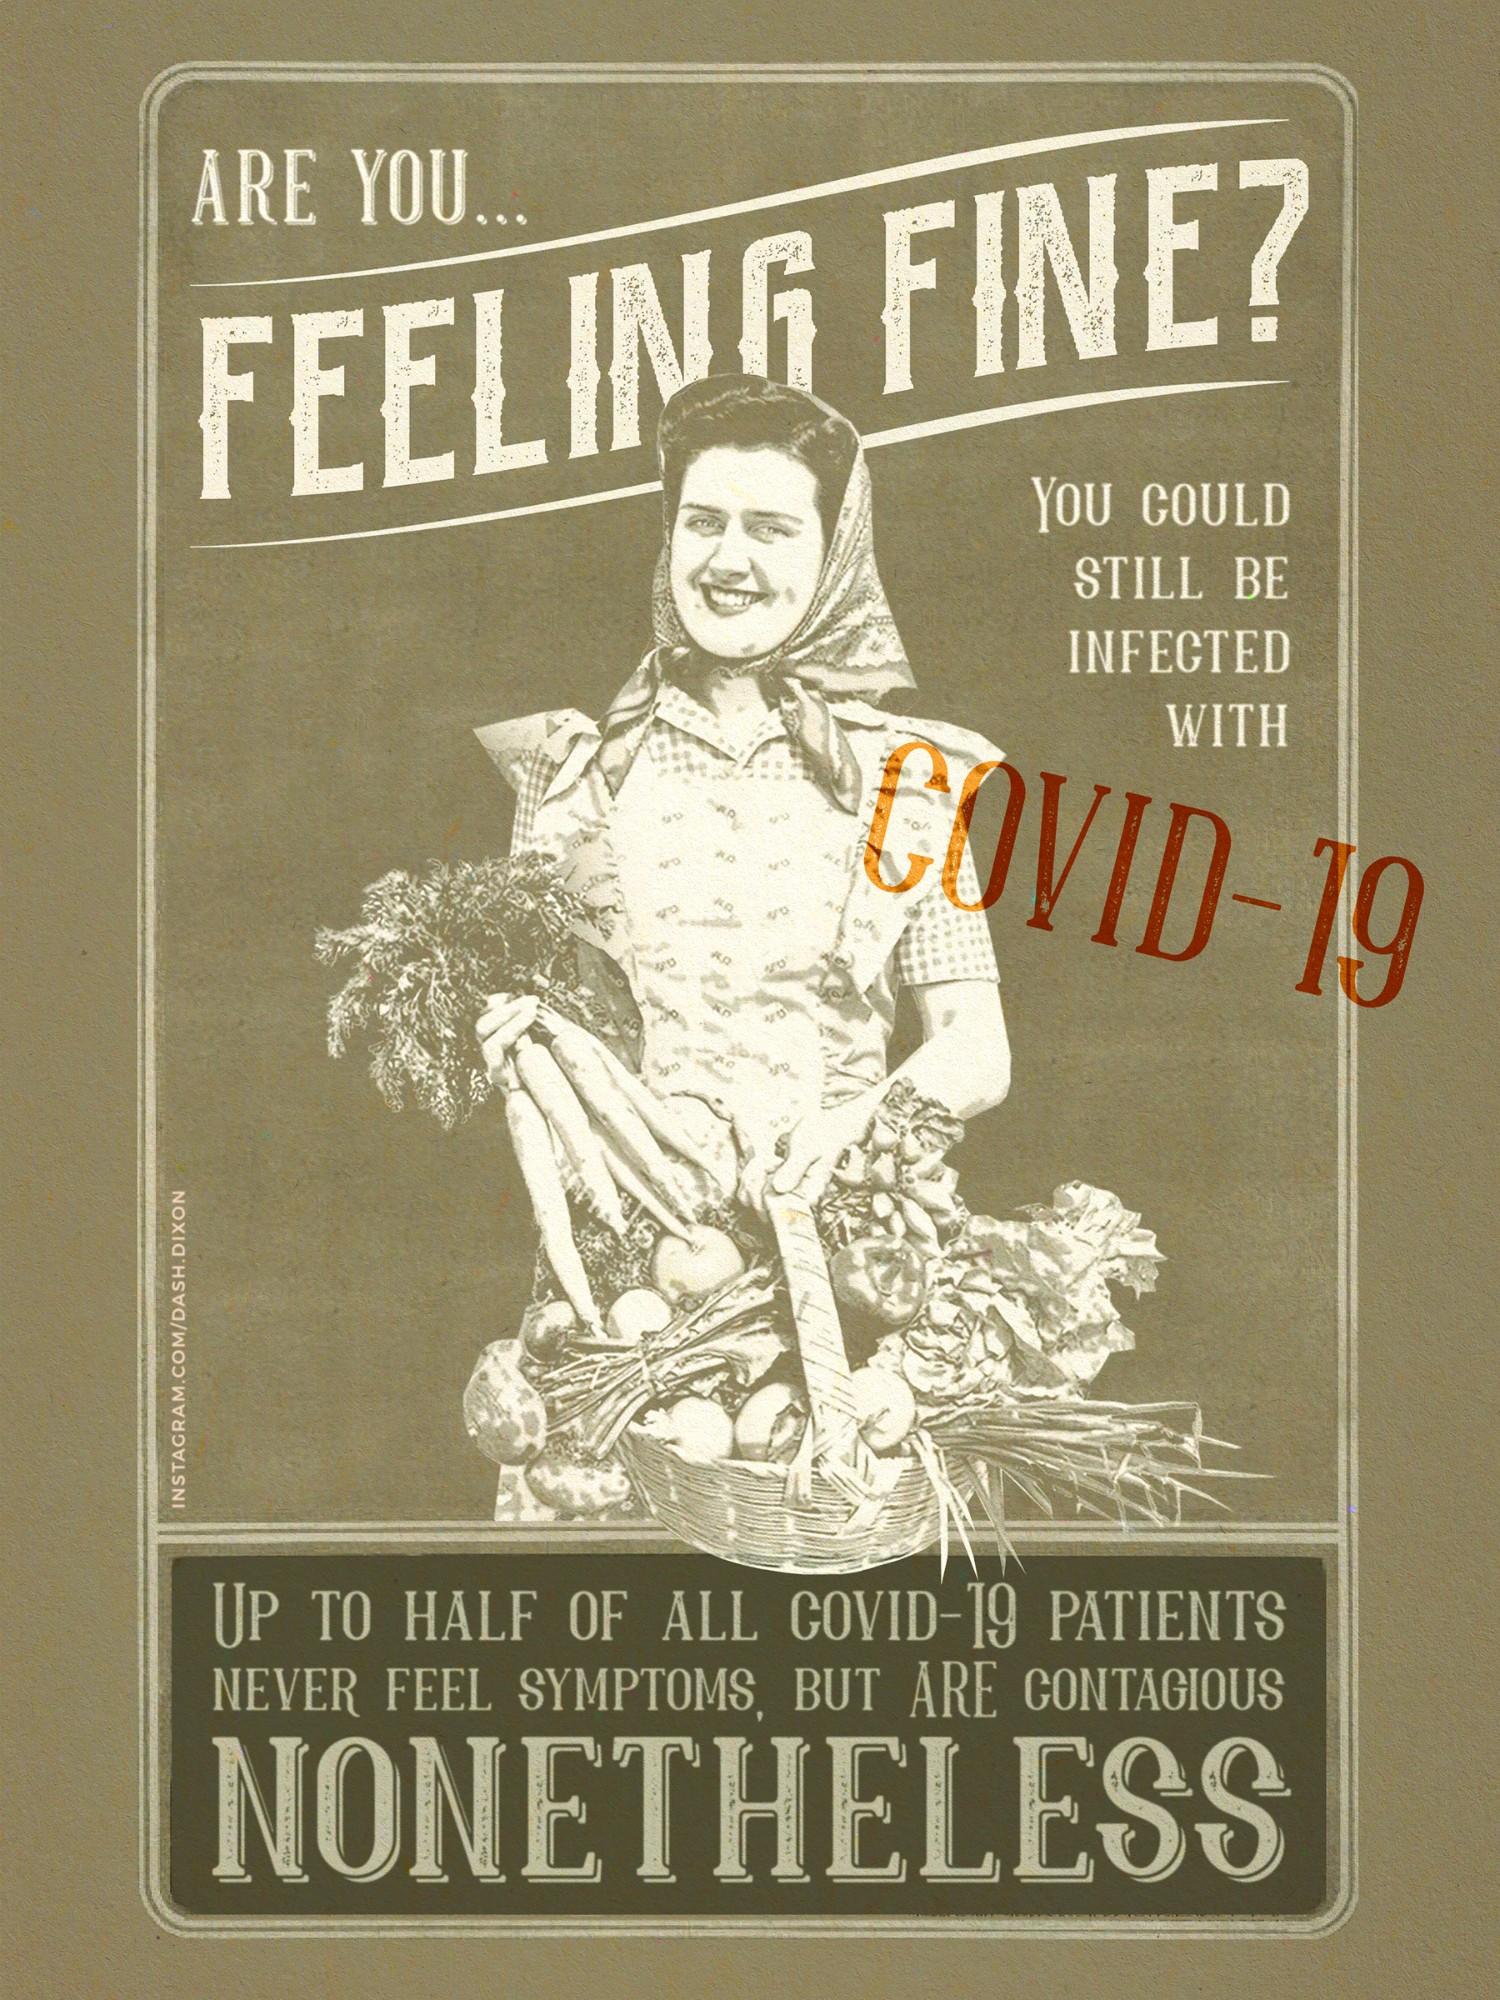 covid-19 propaganda poster showing a smiling woman with a basket of vegetables with the text "feeling fine? you could still be infected with covid-19"